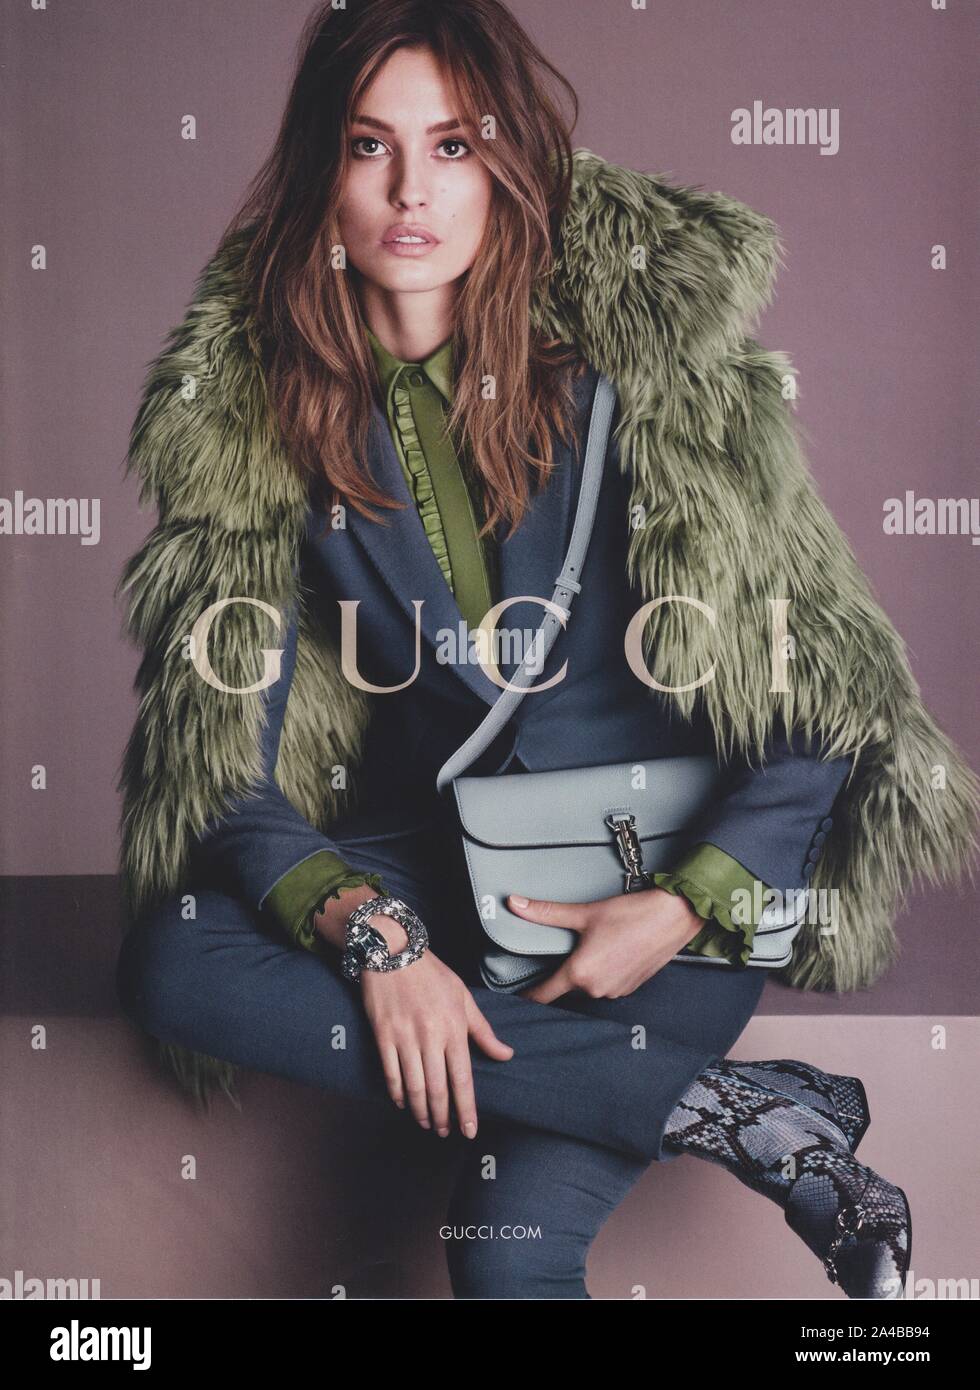 poster advertising GUCCI fashion house with Nadja Bender in paper magazine from 2014 year, advertisement, creative GUCCI advert from 2010s Stock Photo